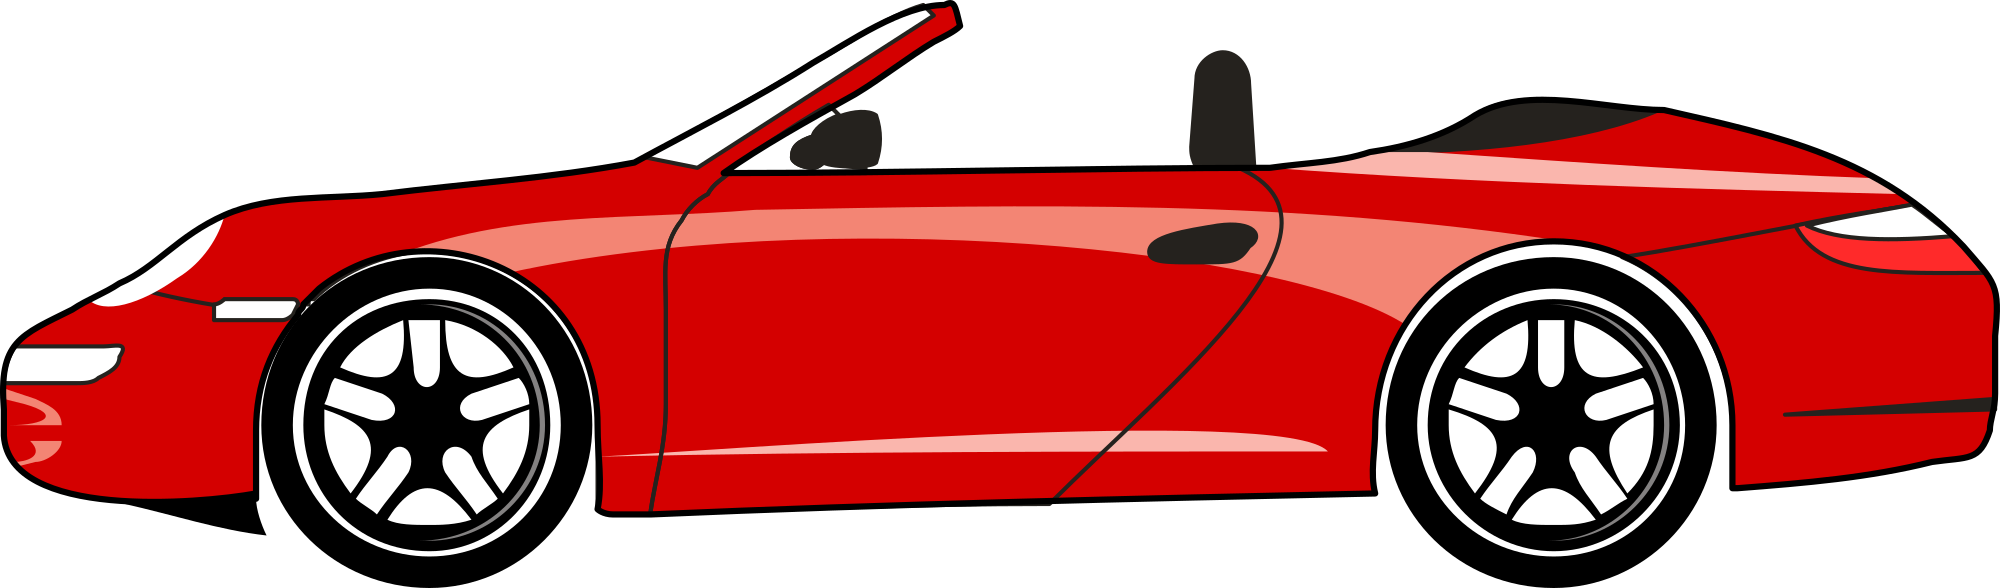 Free red sports car clipart clipart and vector image